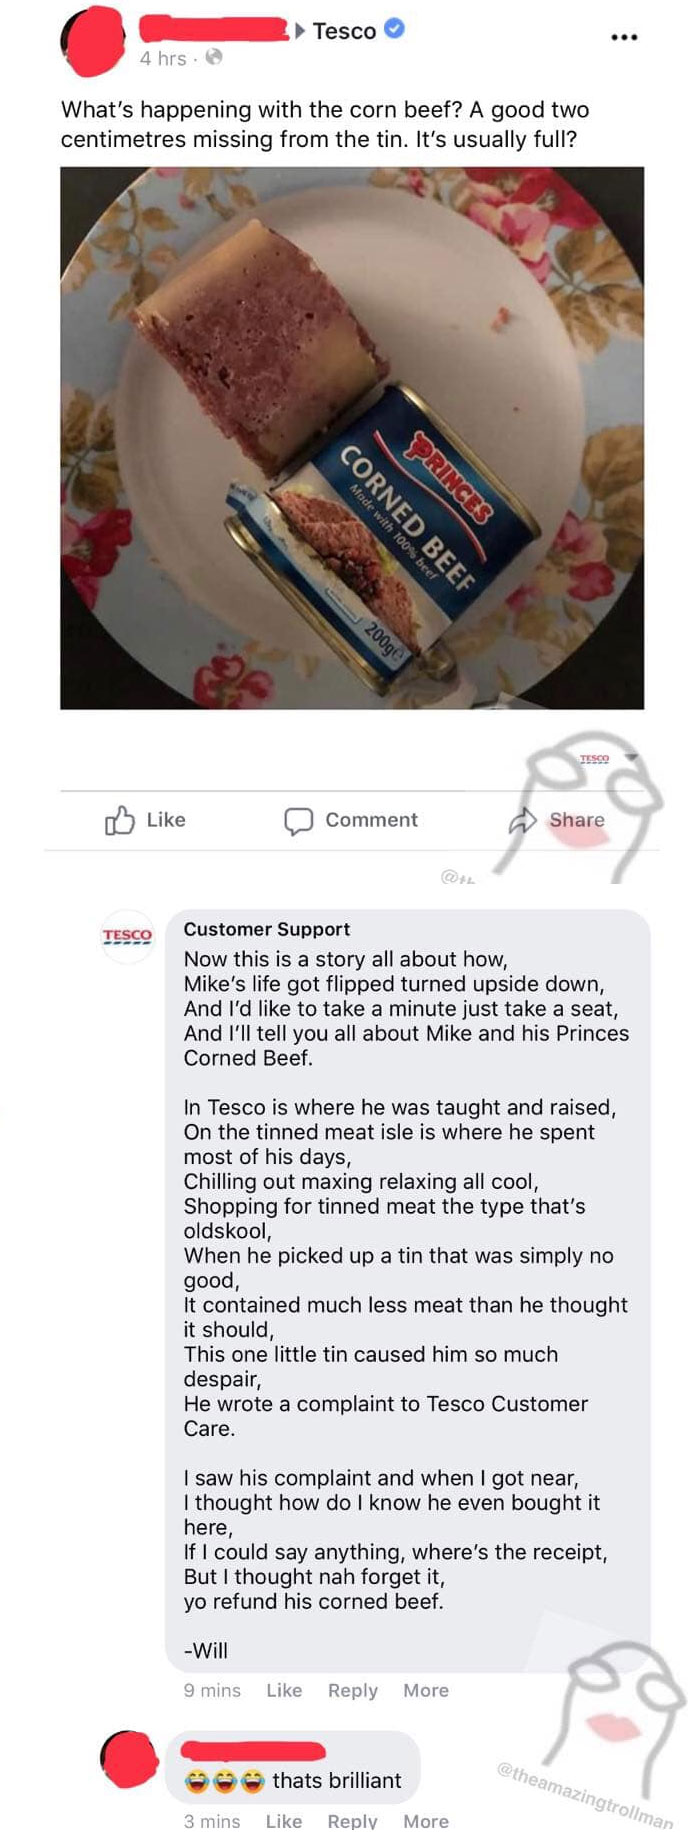 Tesco 4 hrs. What's happening with the corn beef? A good two centimetres missing from the tin. It's usually full? Qrinces Corned Beef Made with 100% beef 200ge Tesco Comment Tesco Customer Support Now this is a story all about how, Mike's life got flipped